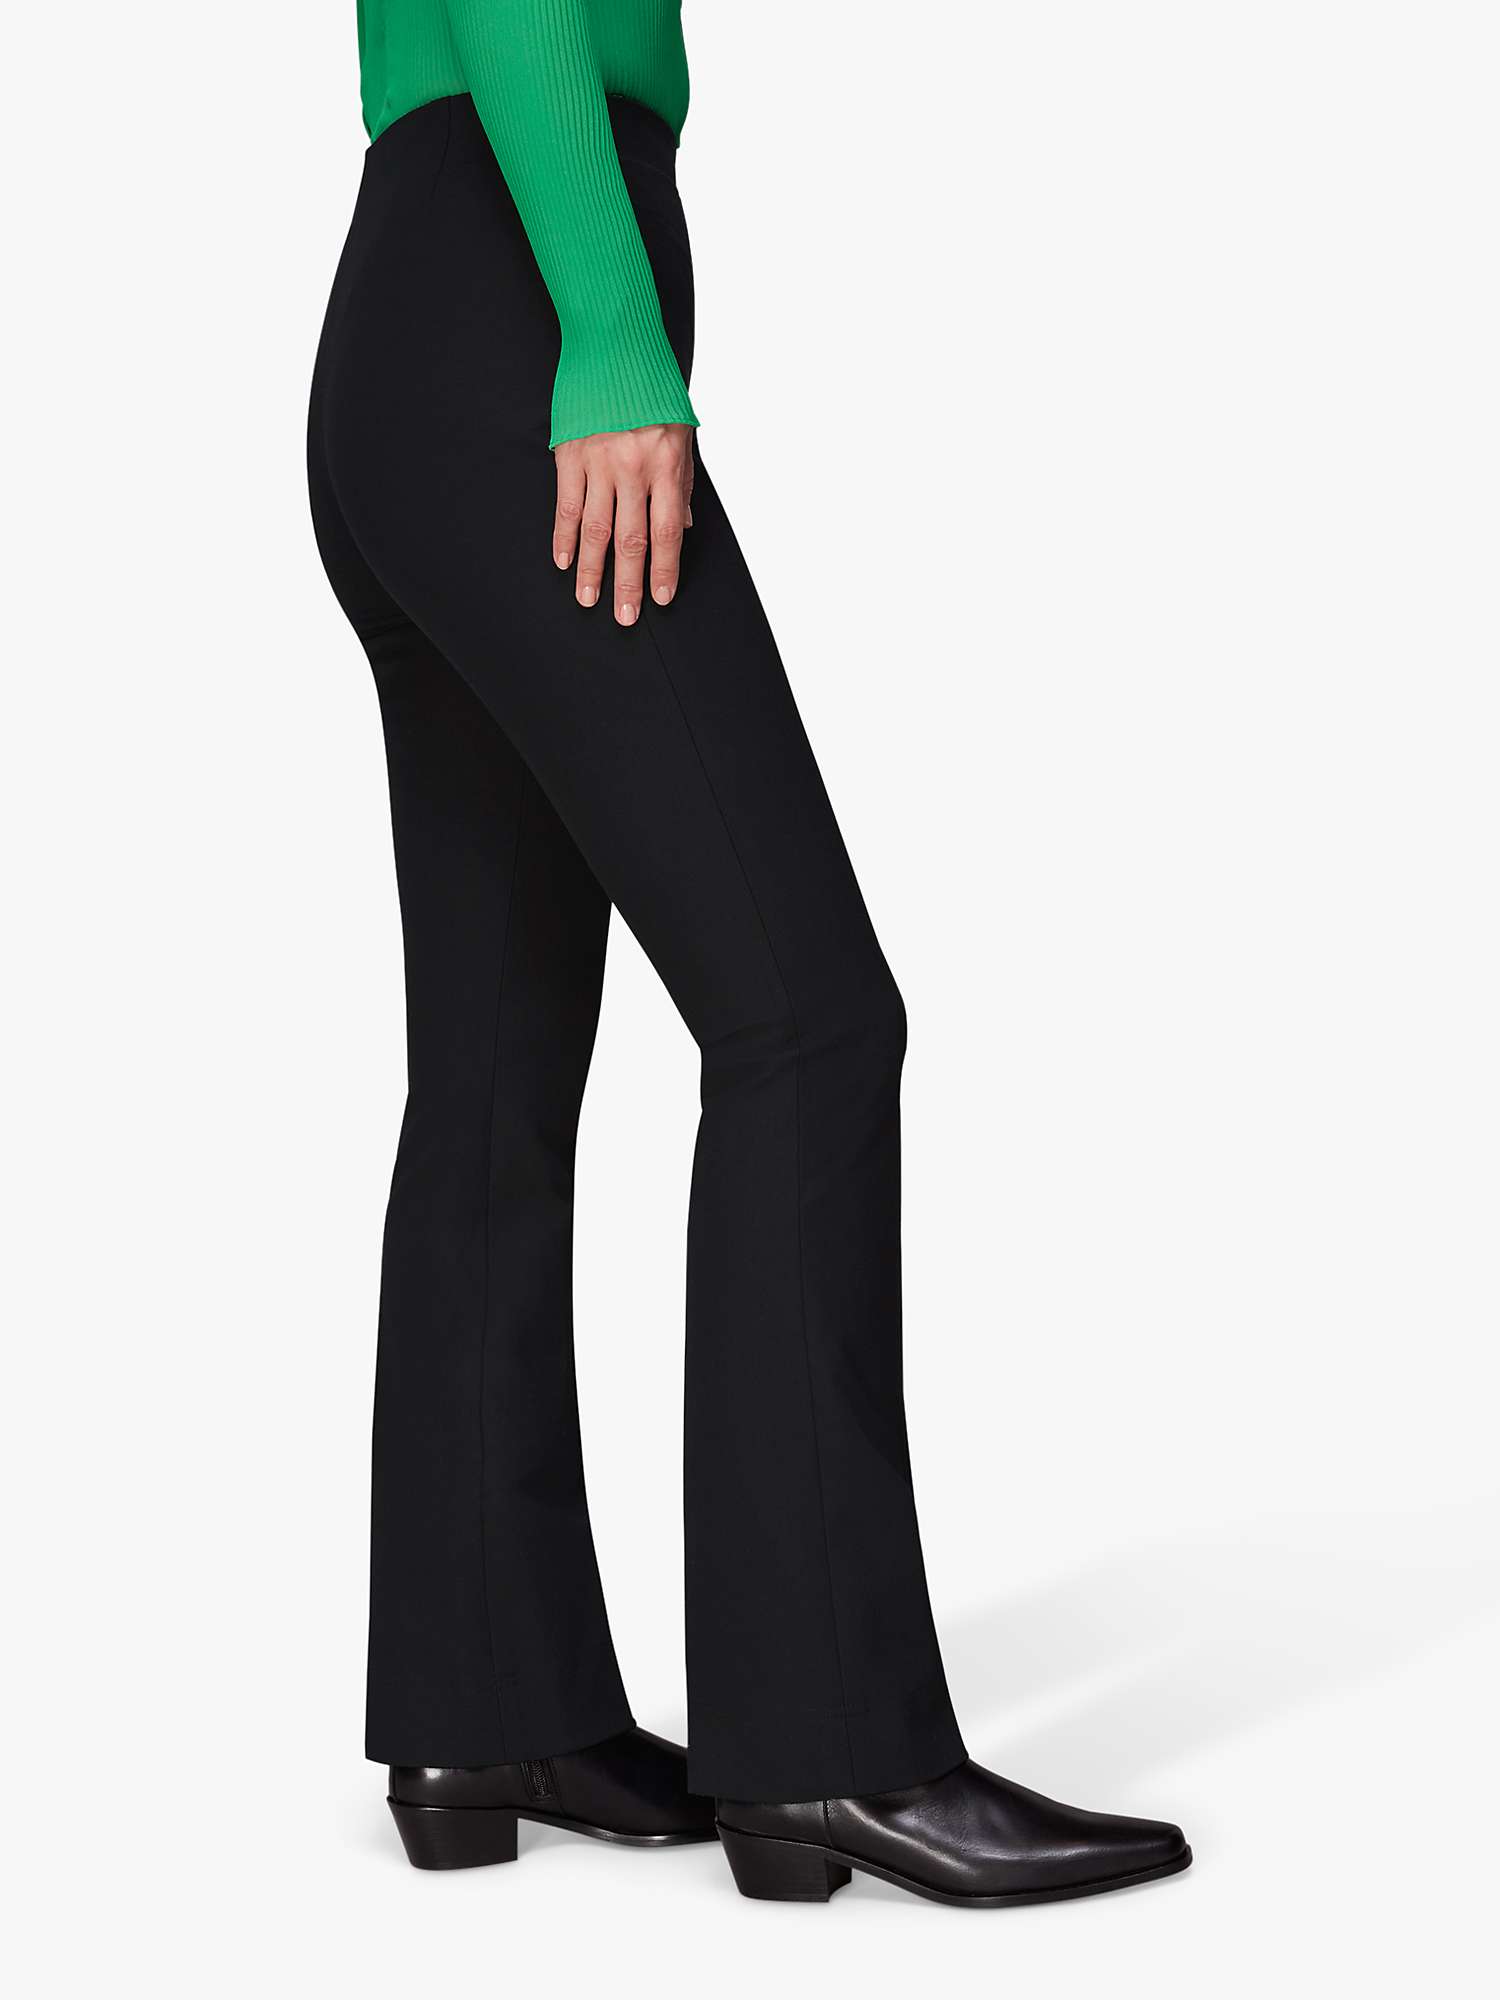 Buy Whistles Lucy Kick Flare Trousers, Black Online at johnlewis.com